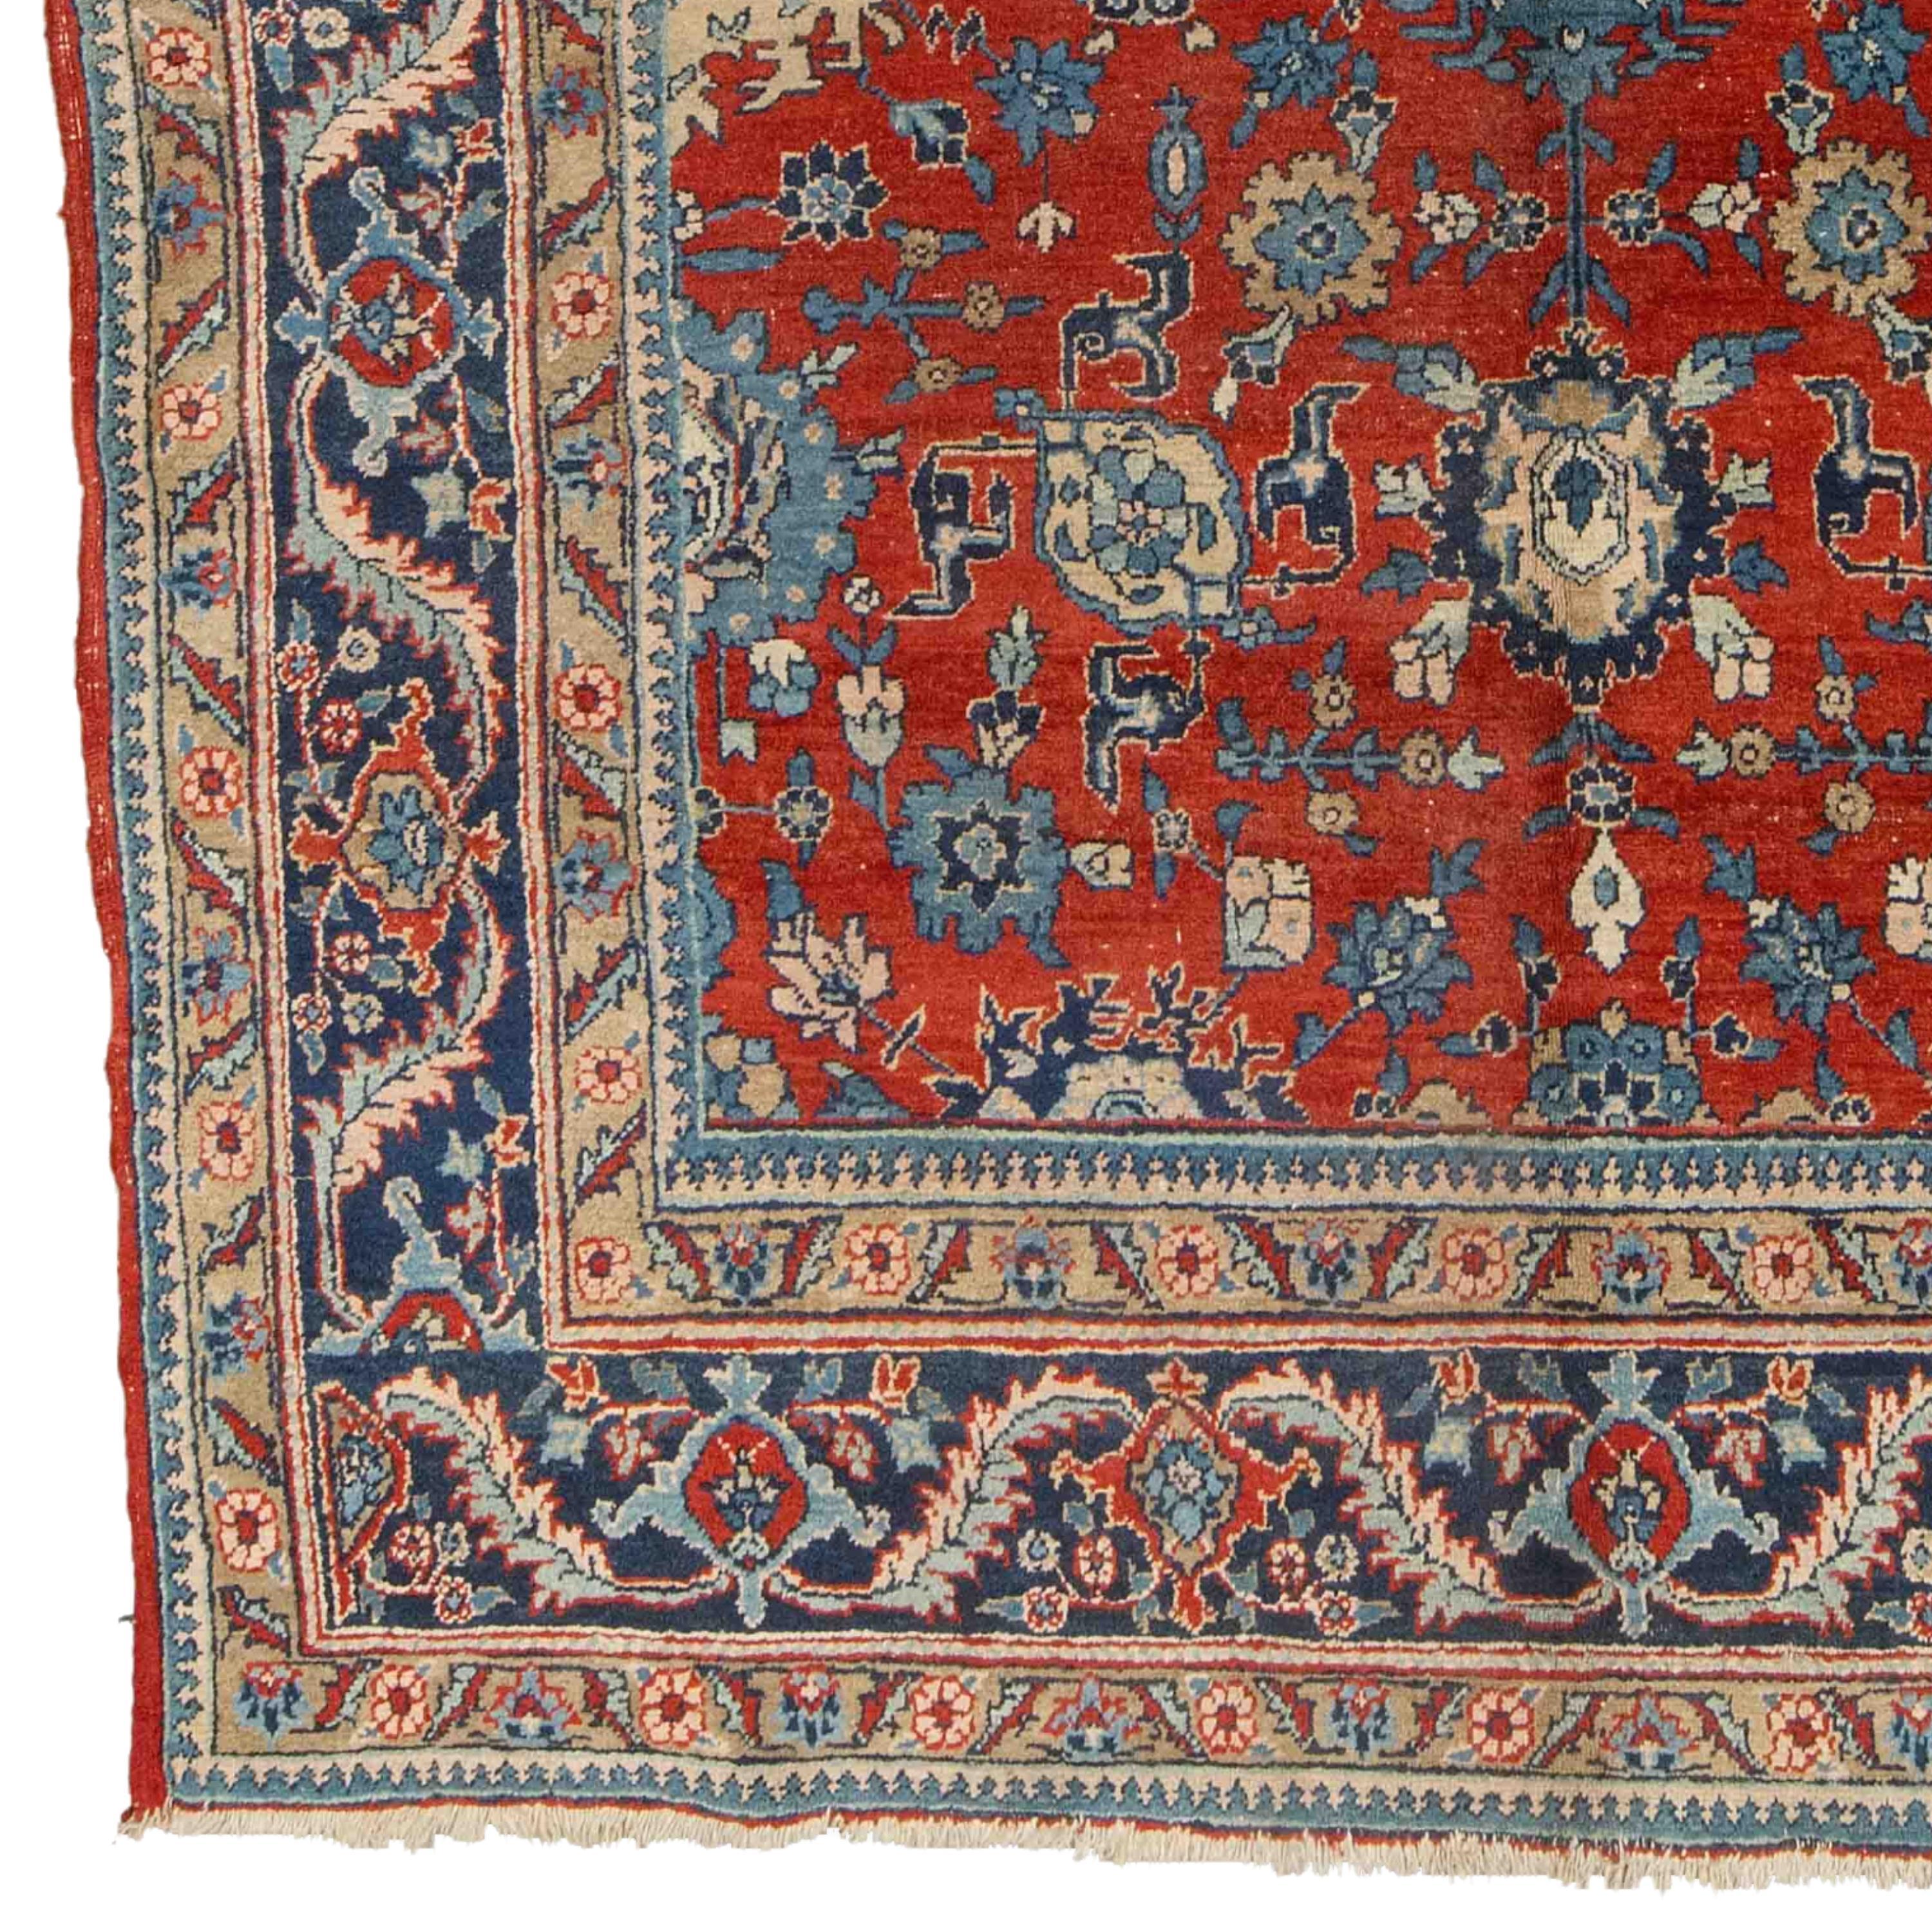 Antique Tabriz Rug 225 x 325cm (7,38 x 10,66 ft) Late of 19th Century Tabriz Rug

From the mid-19th century, there was a revival in commercial carpet production in Azerbaijan, and Tabriz became one of the country's most important centers producing